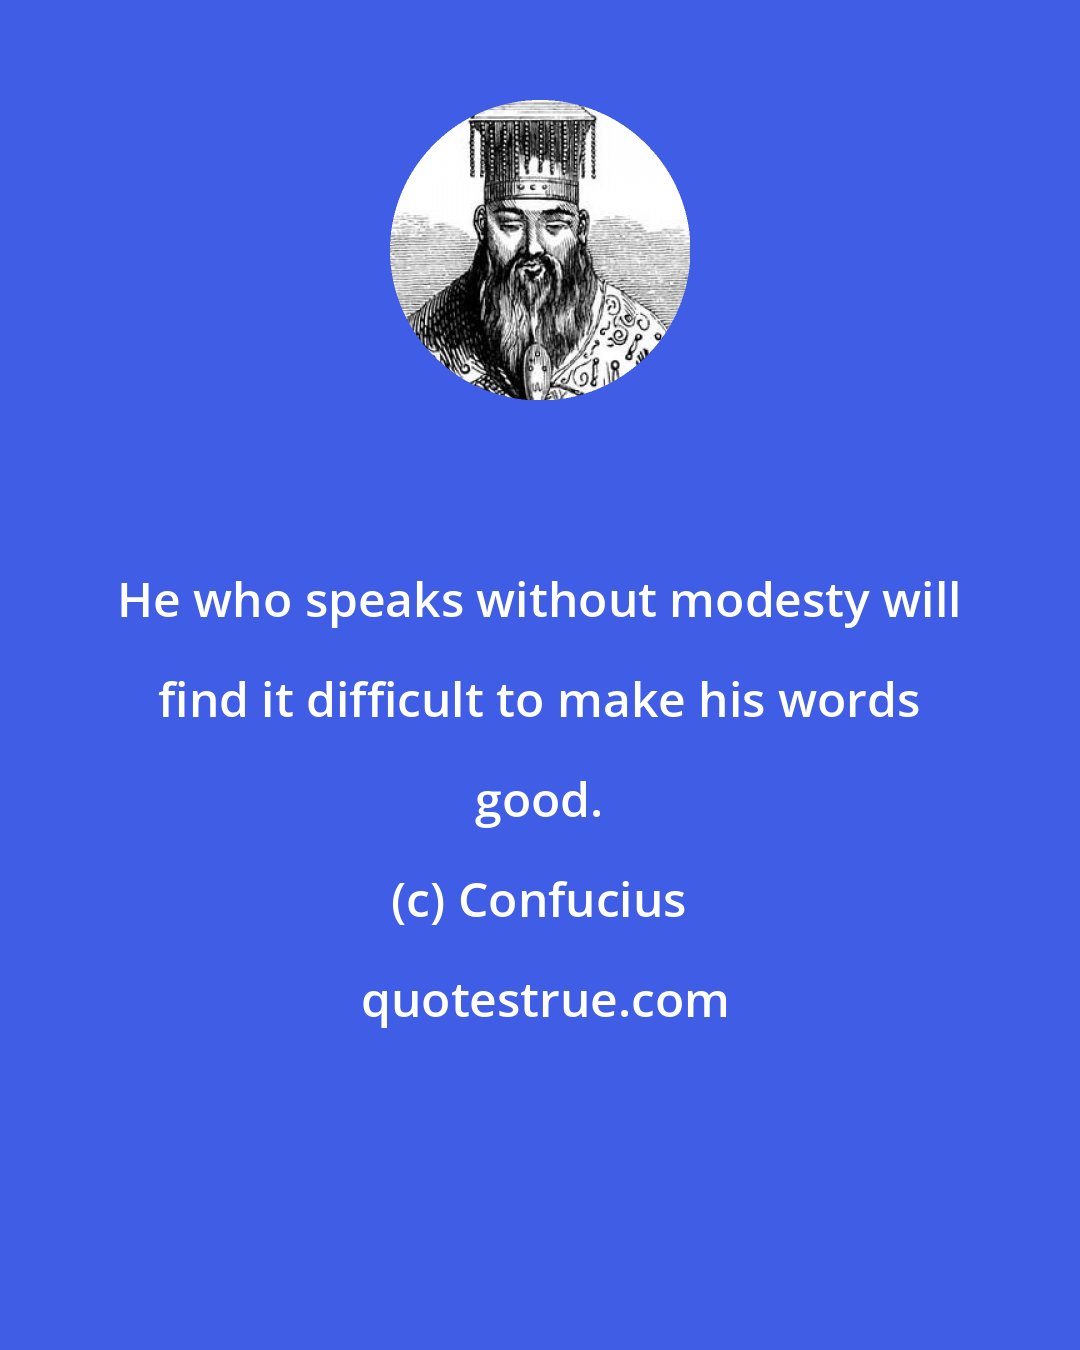 Confucius: He who speaks without modesty will find it difficult to make his words good.